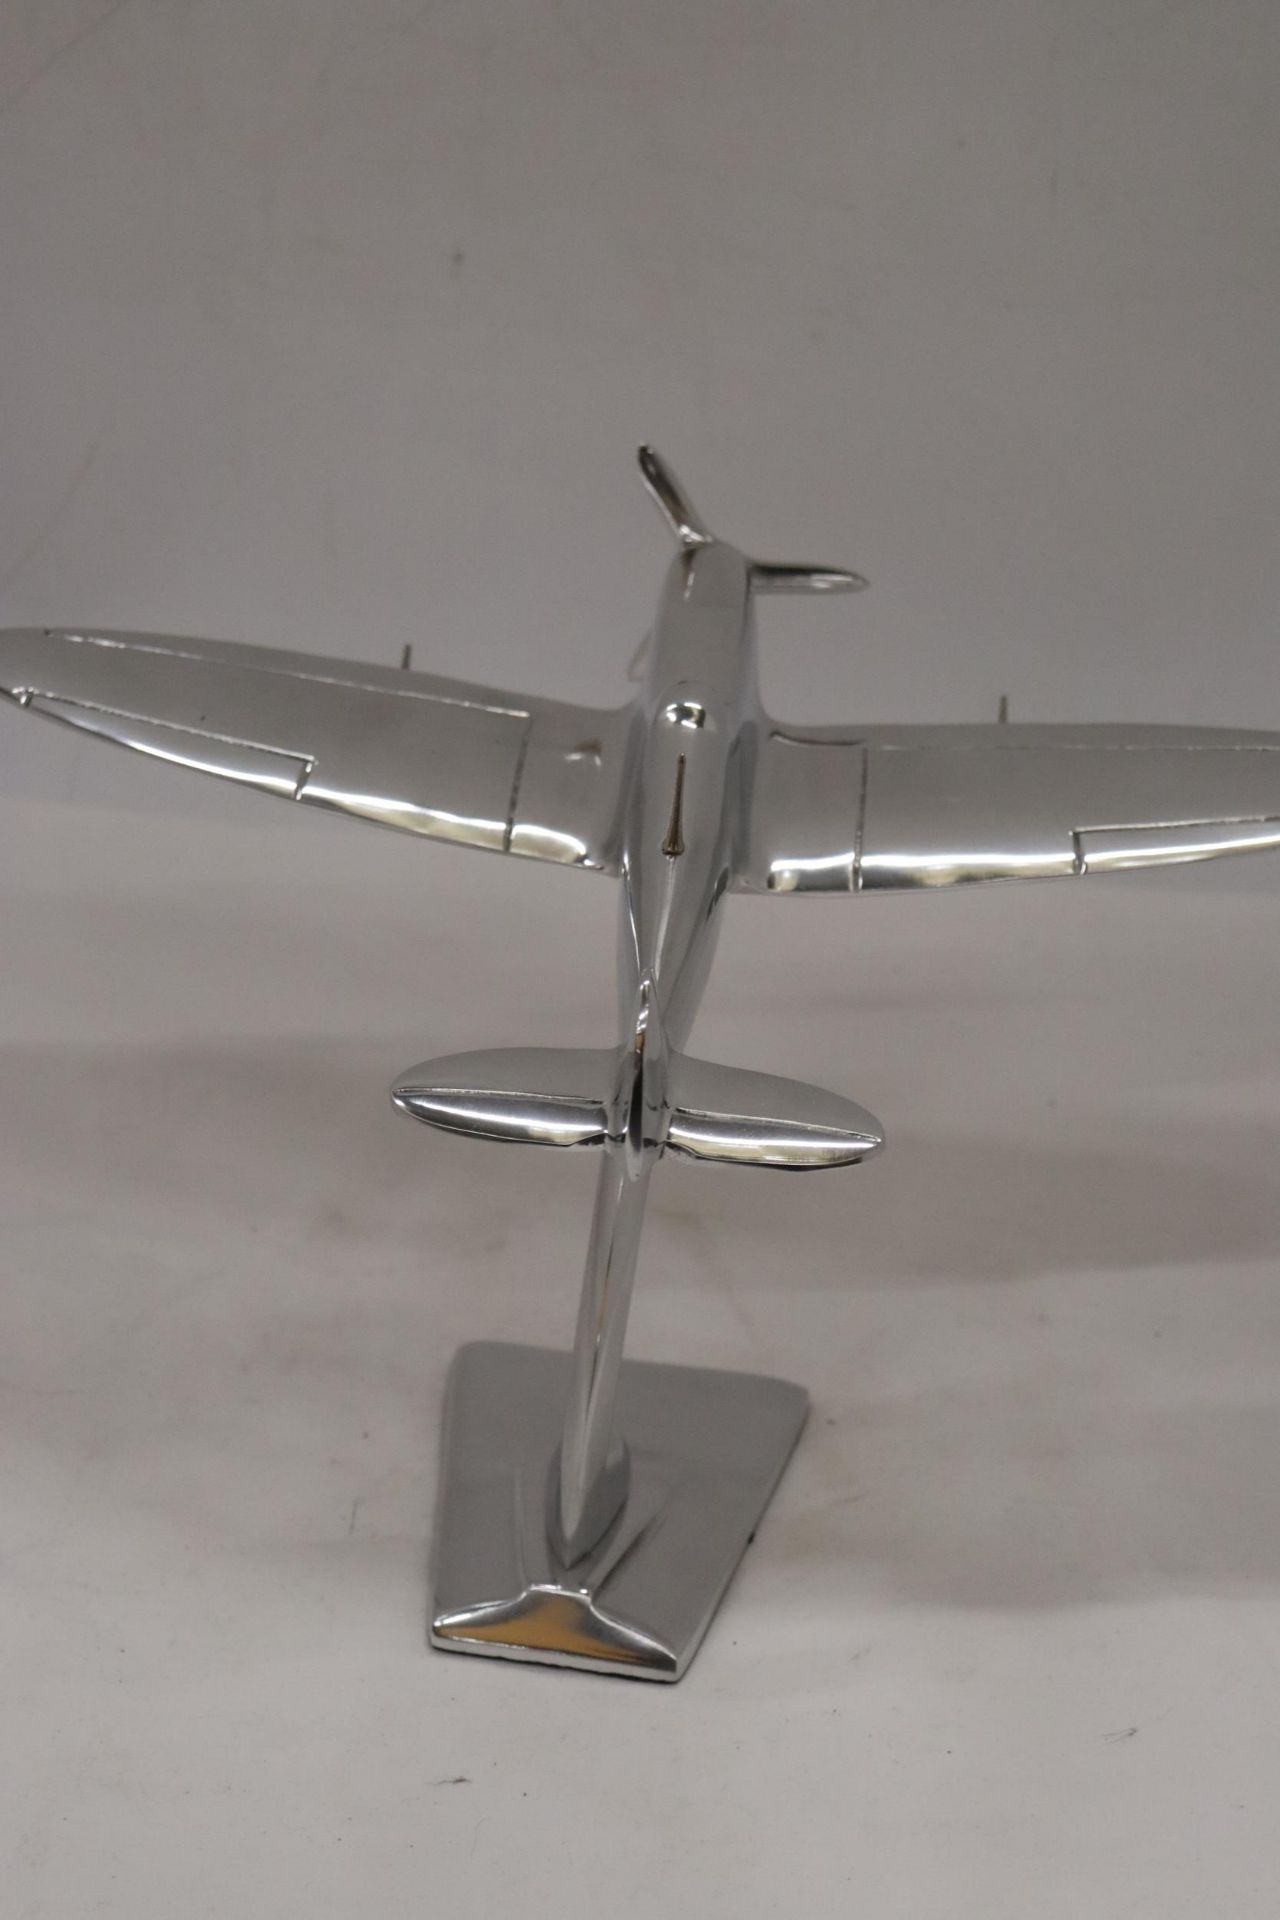 A LARGE CHROME SPITFIRE ON A STAND - Image 4 of 6